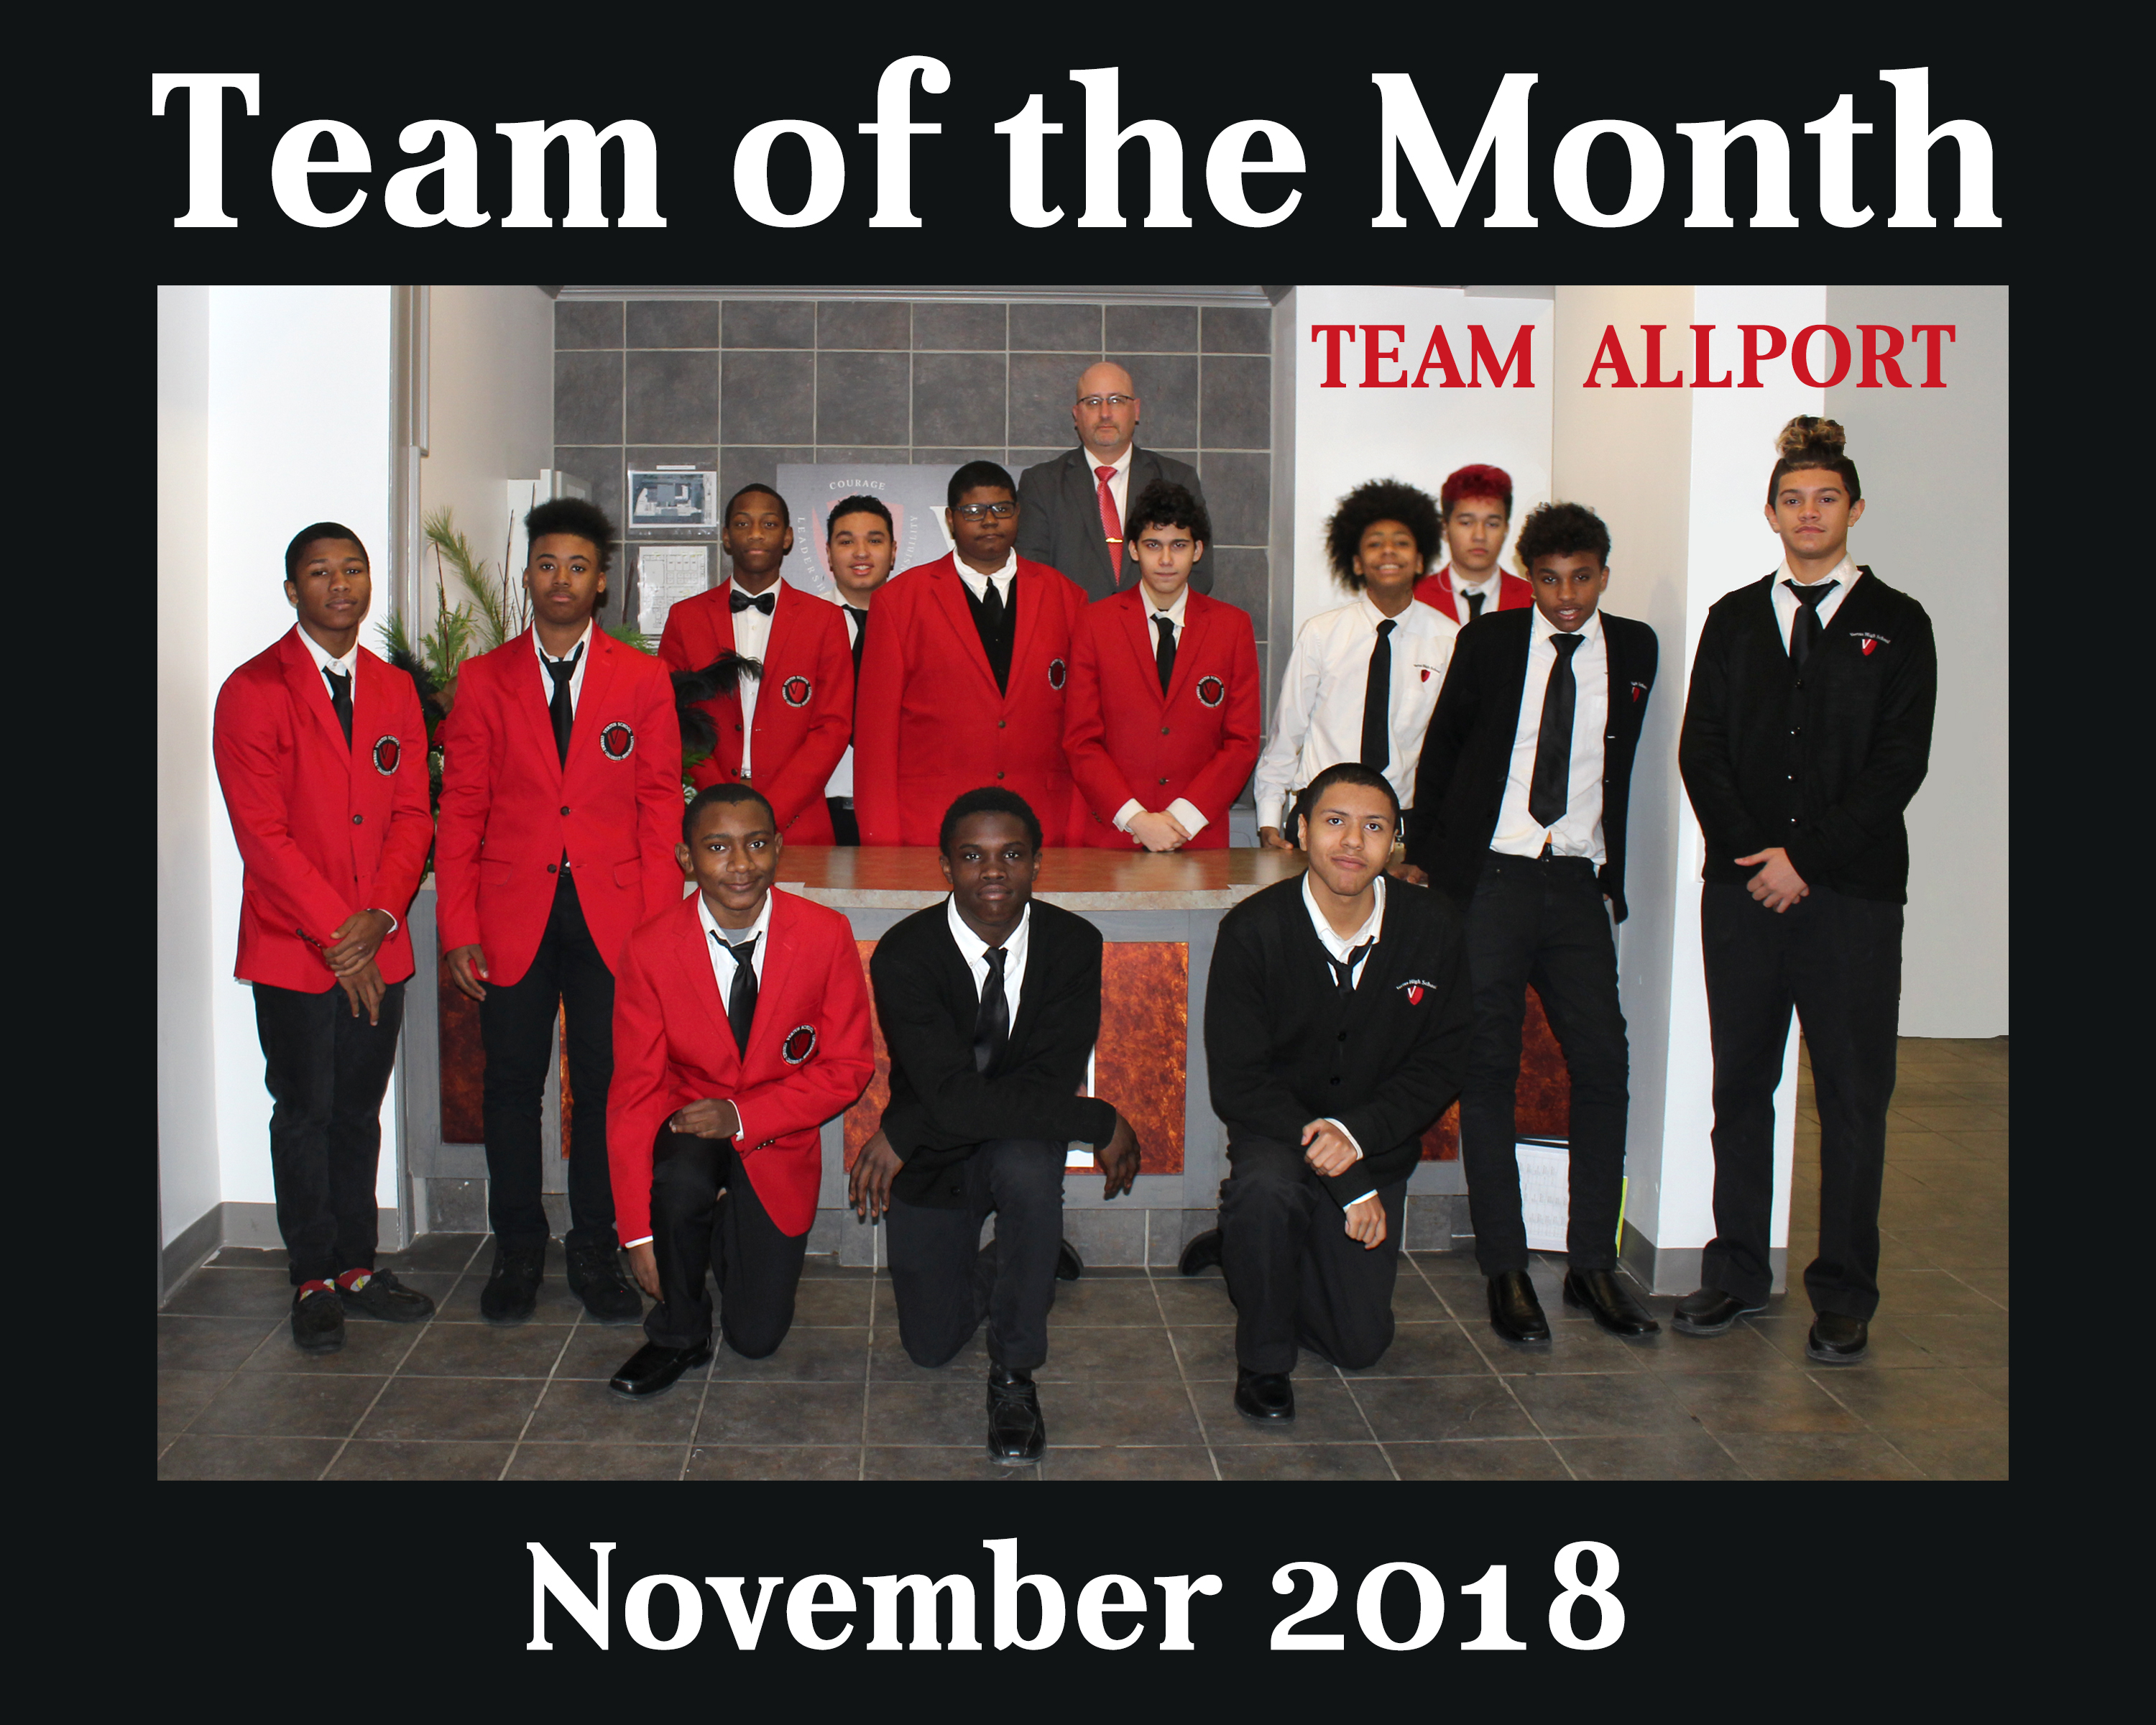 Team of the Month - November 2018